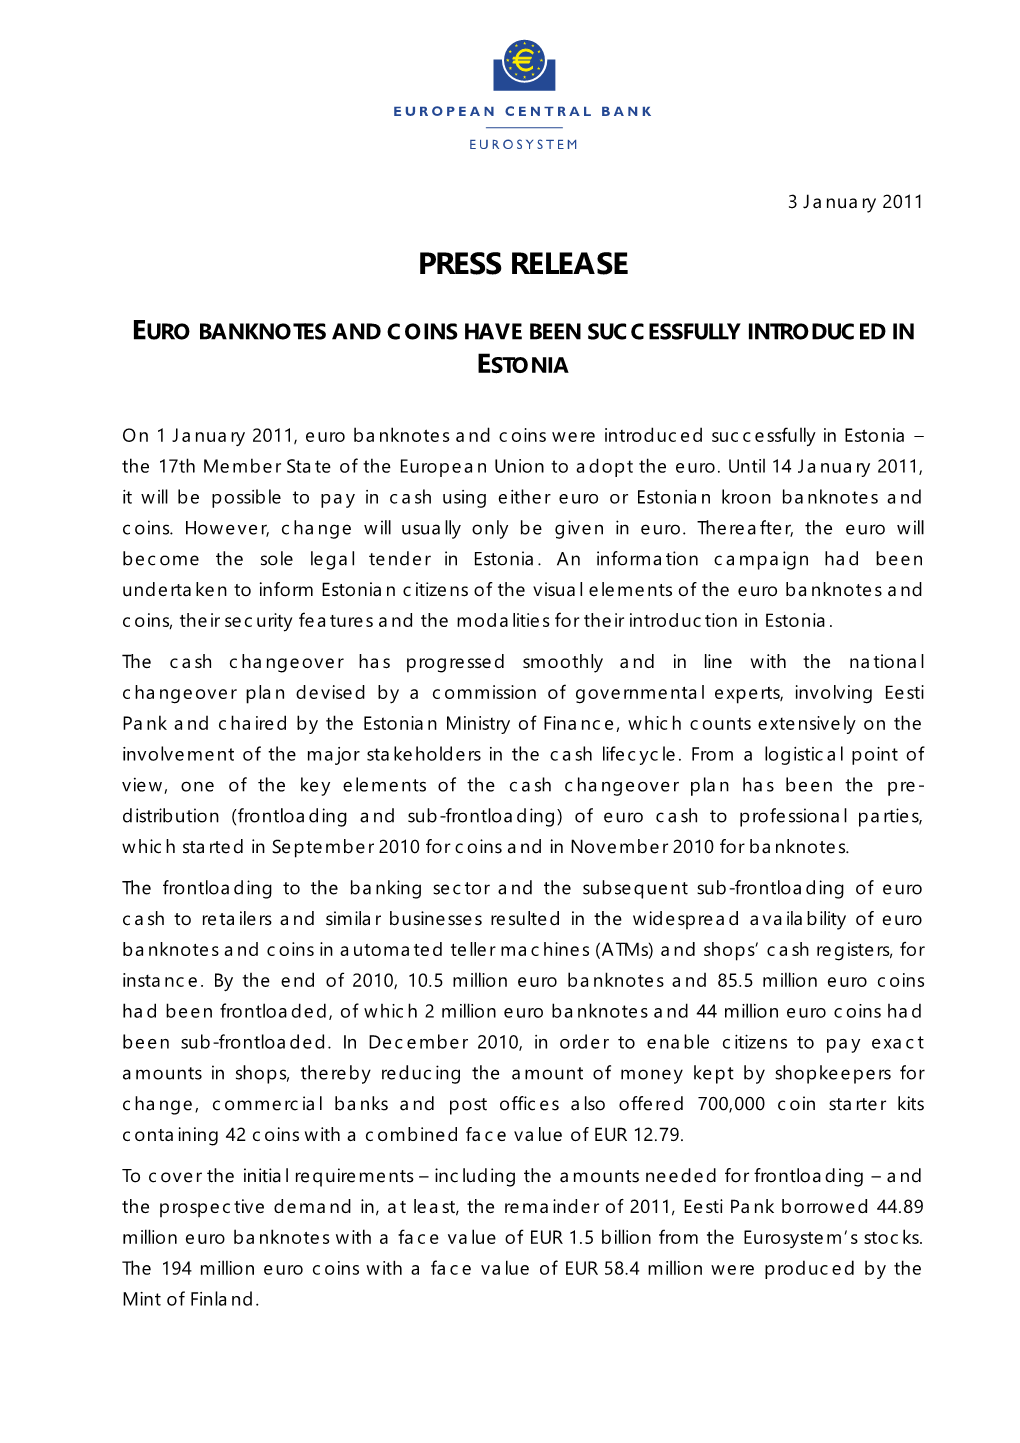 Press Release Euro Banknotes and Coins Have Been Successfully